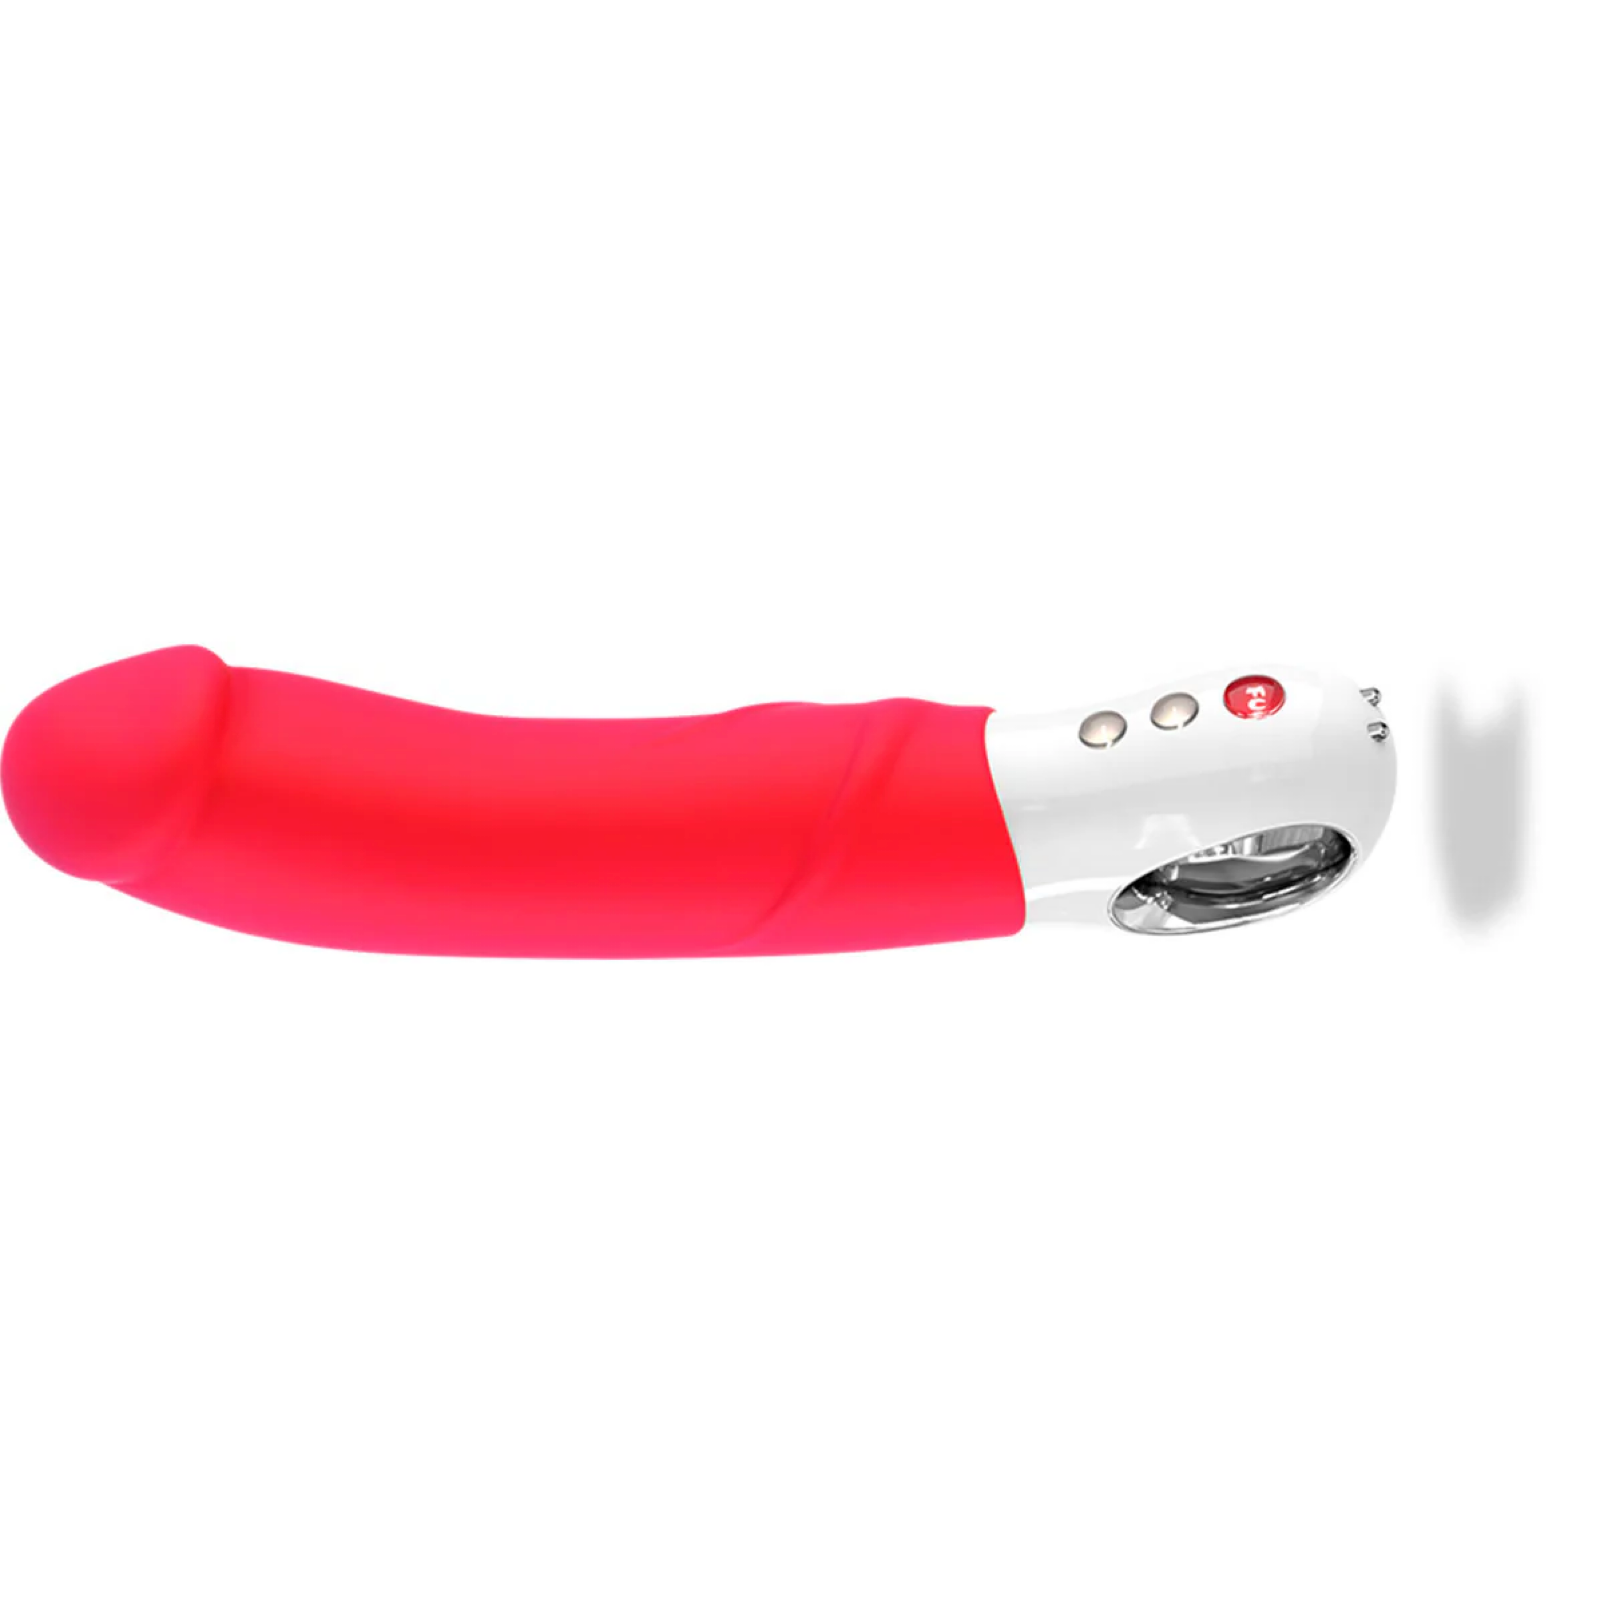 The Inside Scoop: Brand Name Sex Toys vs. Knock-Offs - Why Zateo Joy Recommends the Real Deal